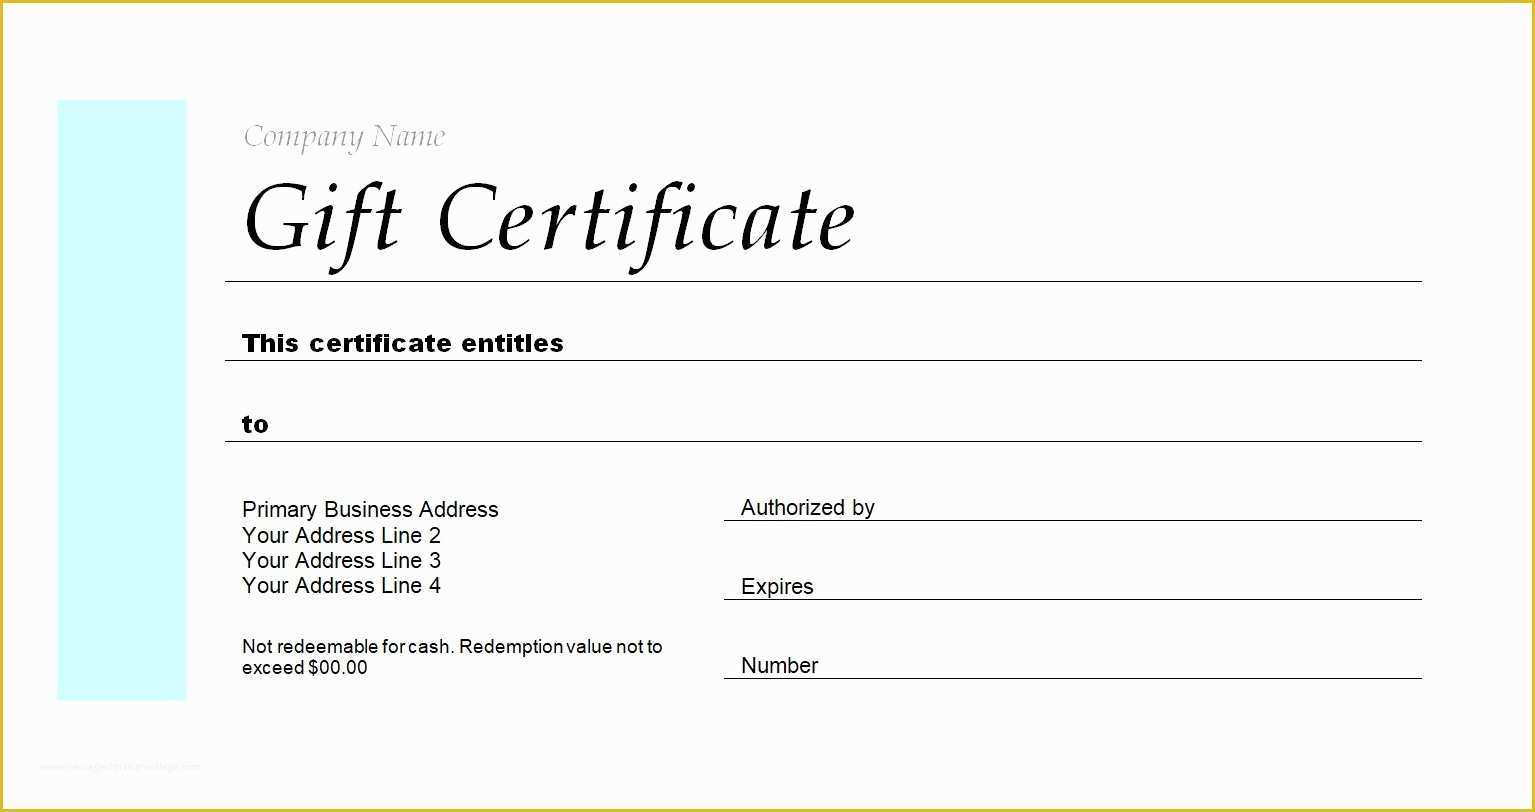 Gift Certificate Template Free Of 173 Free Gift Certificate Templates You Can Customize